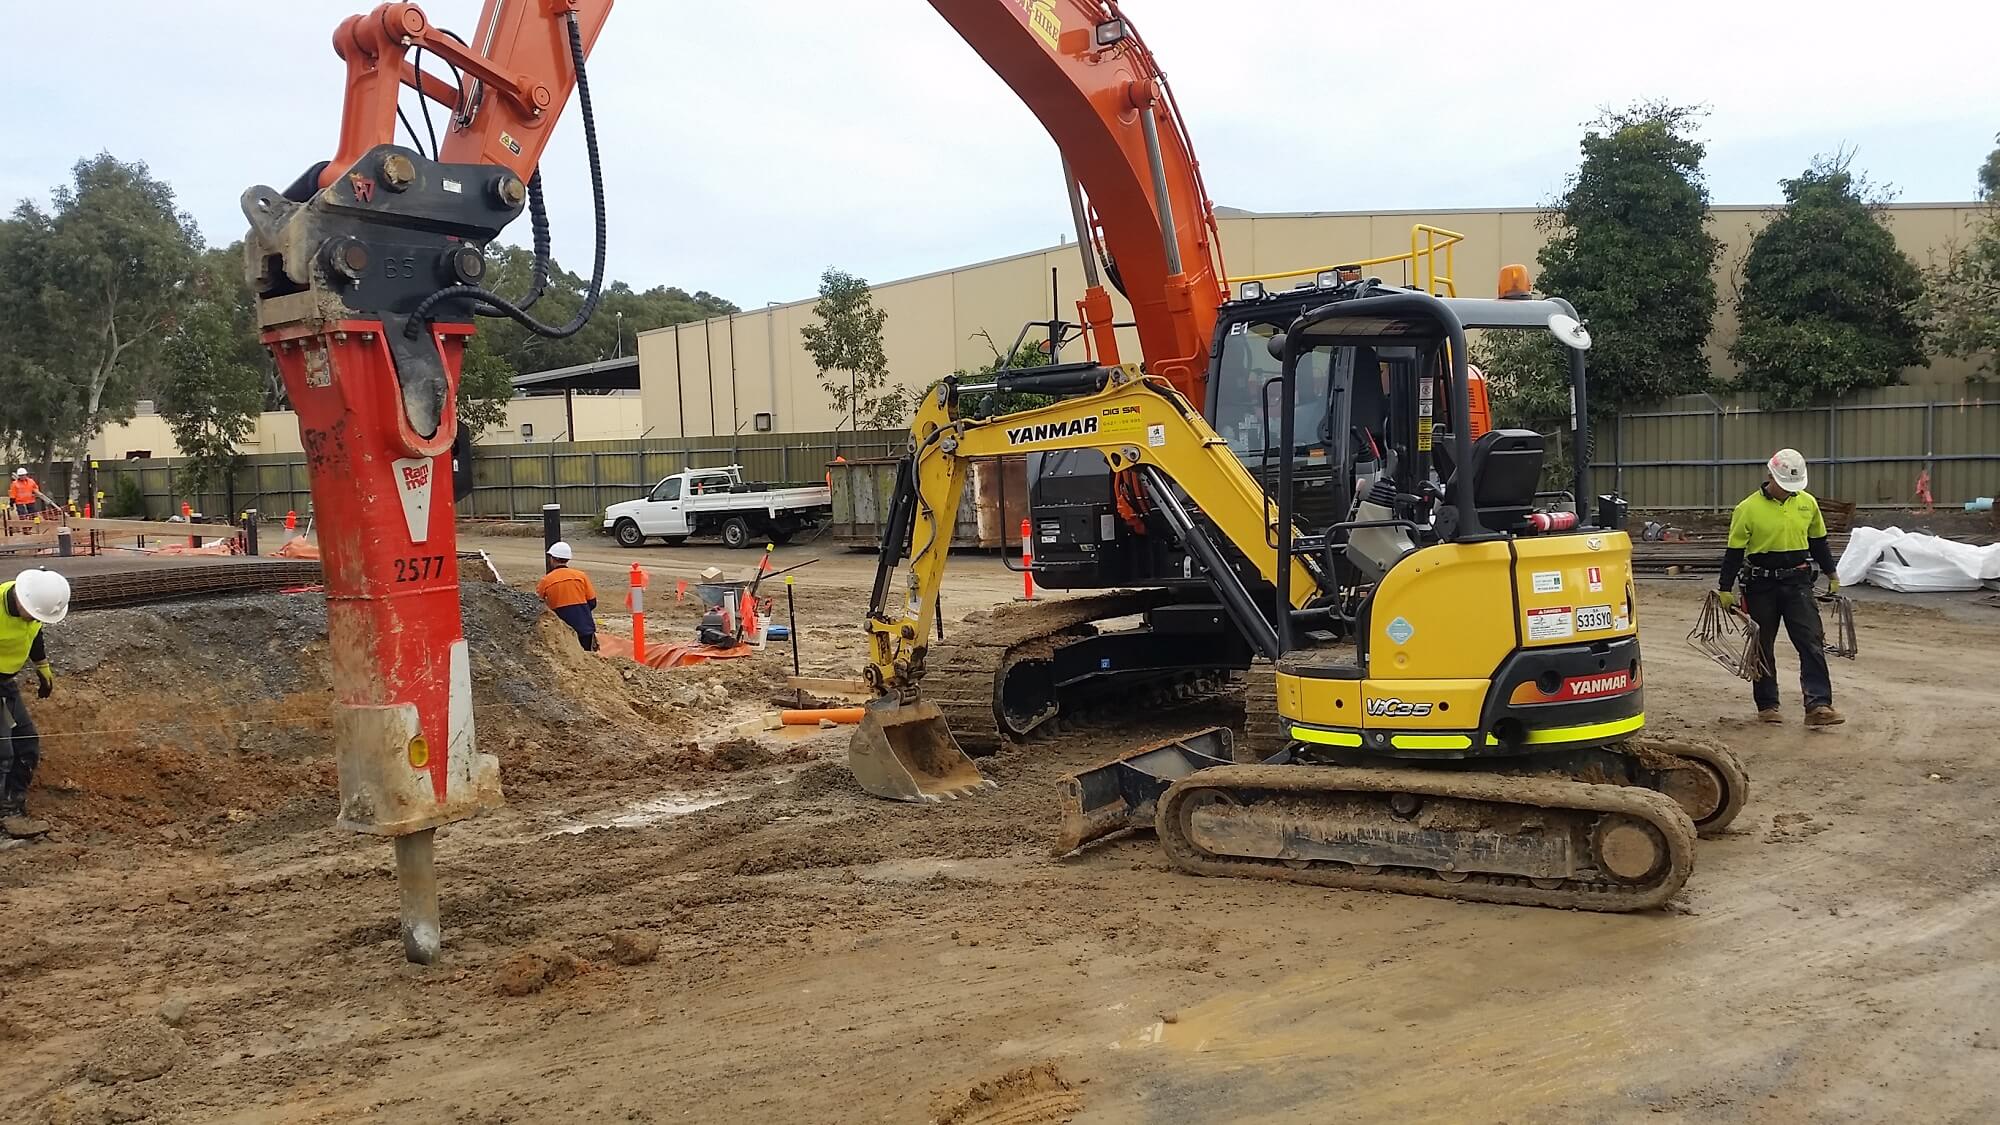 Adelaide Trenching Service